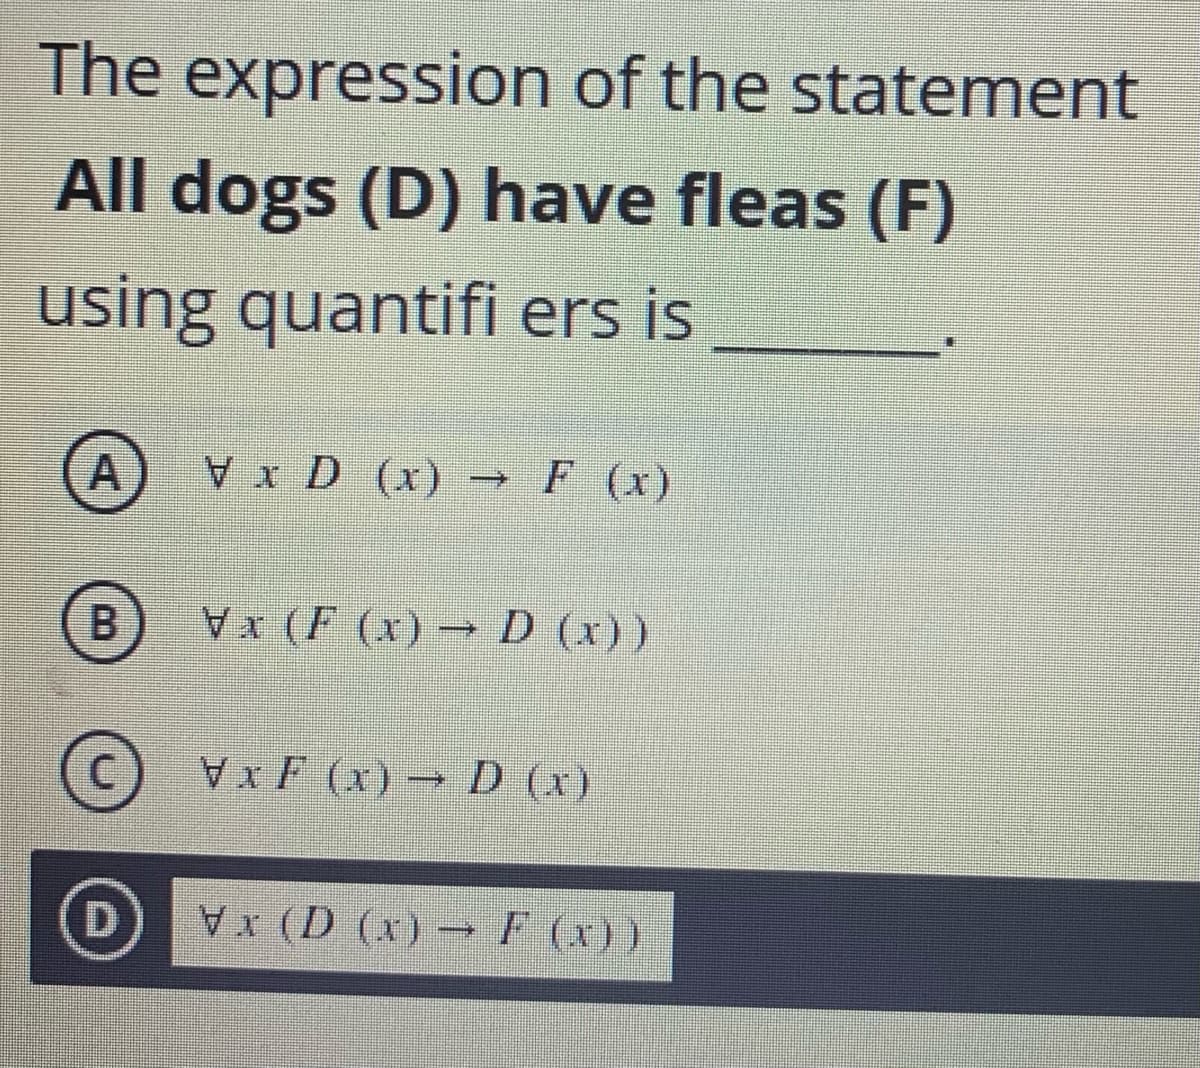 The expression of the statement
All dogs (D) have fleas (F)
using quantifi ers is
A
x D (x) → F (x)
(B) Vx (F (x) → D (x))
XF (x) D (x)
0 D (x) →F (x))
